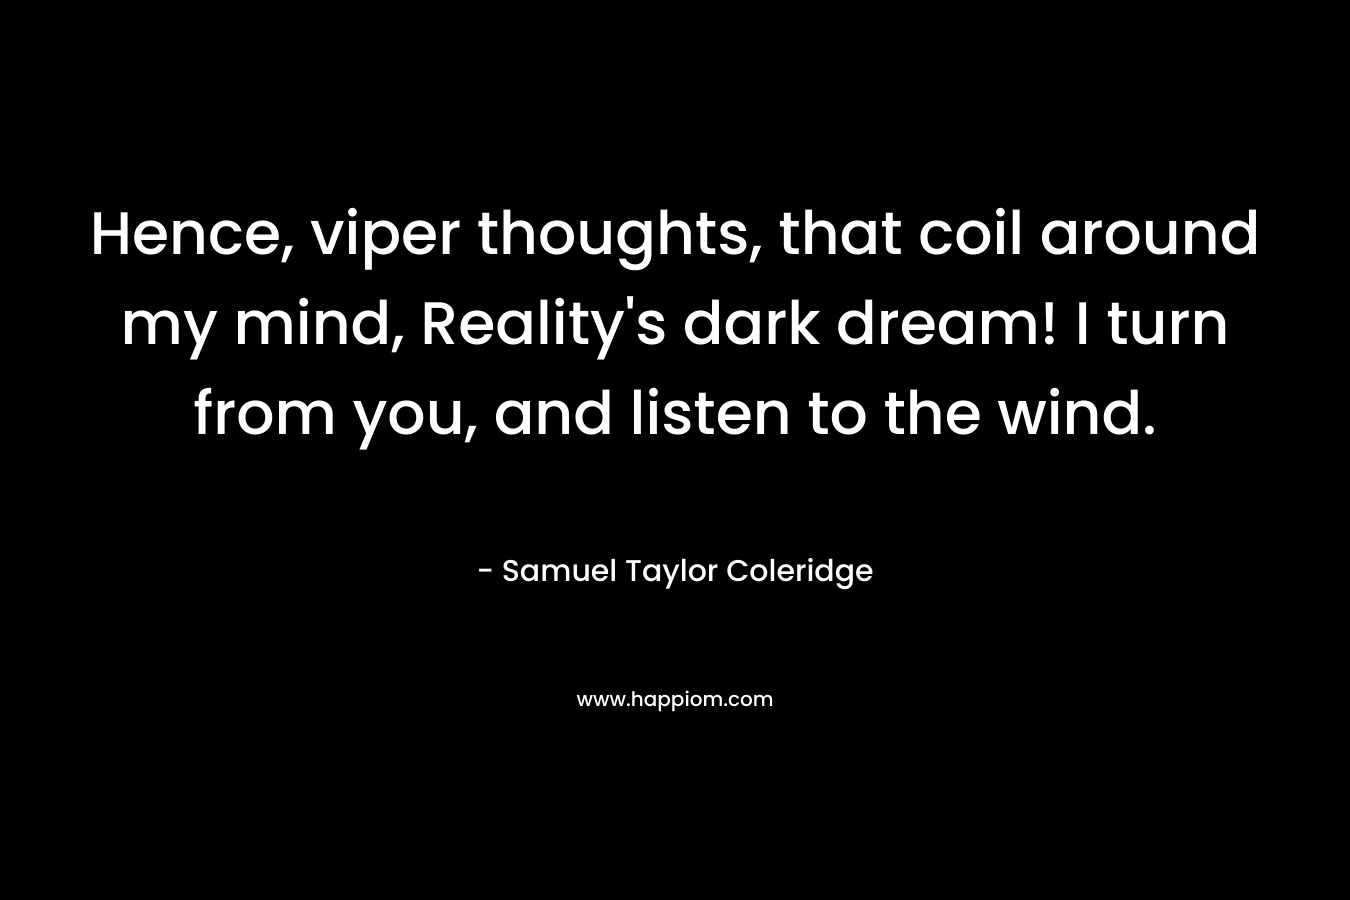 Hence, viper thoughts, that coil around my mind, Reality's dark dream! I turn from you, and listen to the wind.